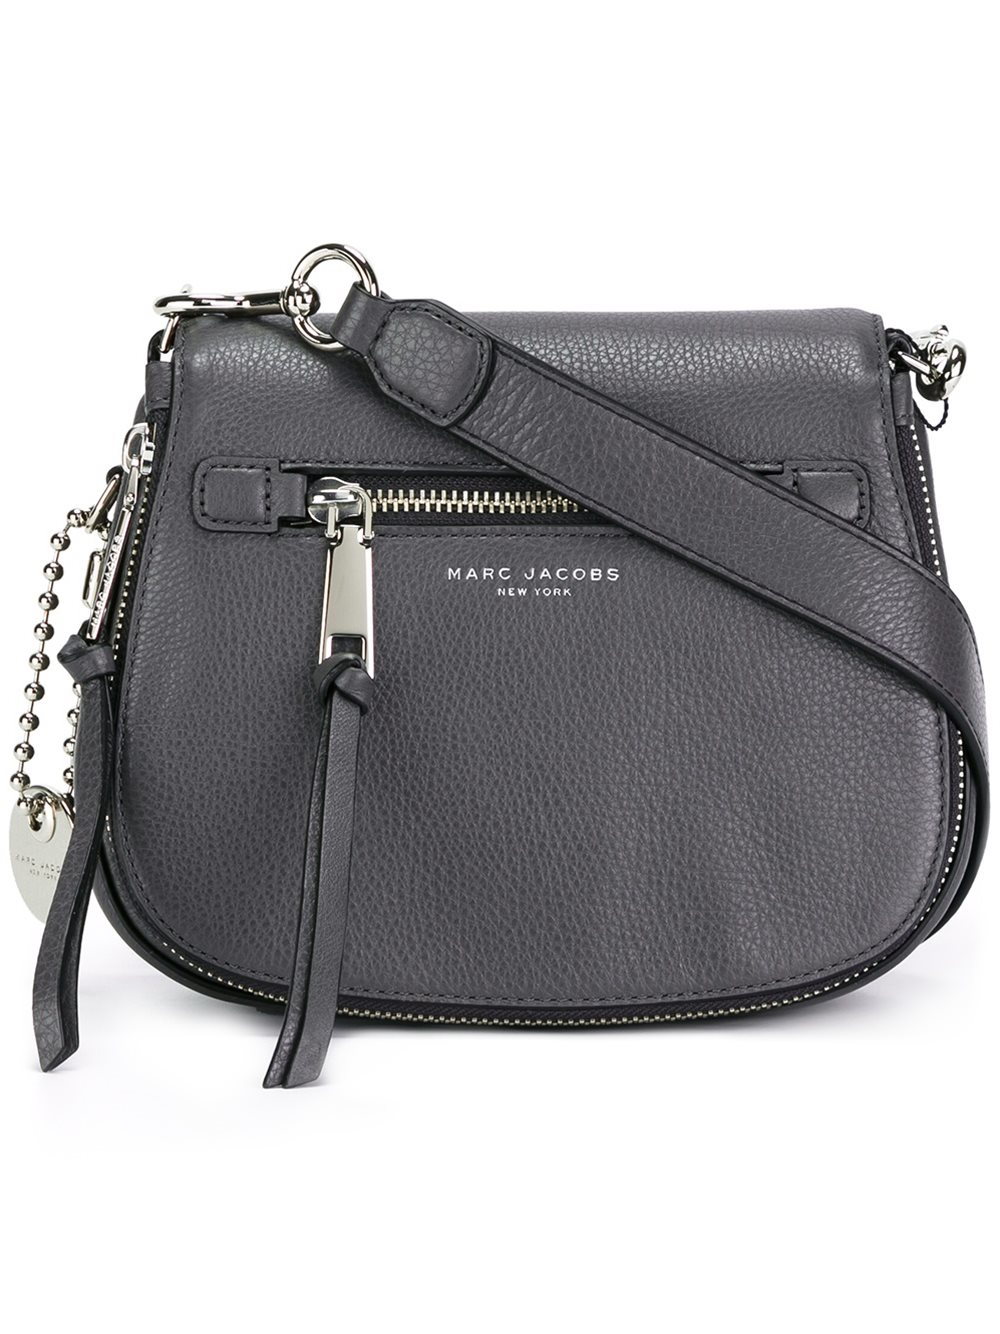 Marc jacobs - Small 'recruit' Saddle Crossbody Bag - Women - Leather - One Size in Gray | Lyst